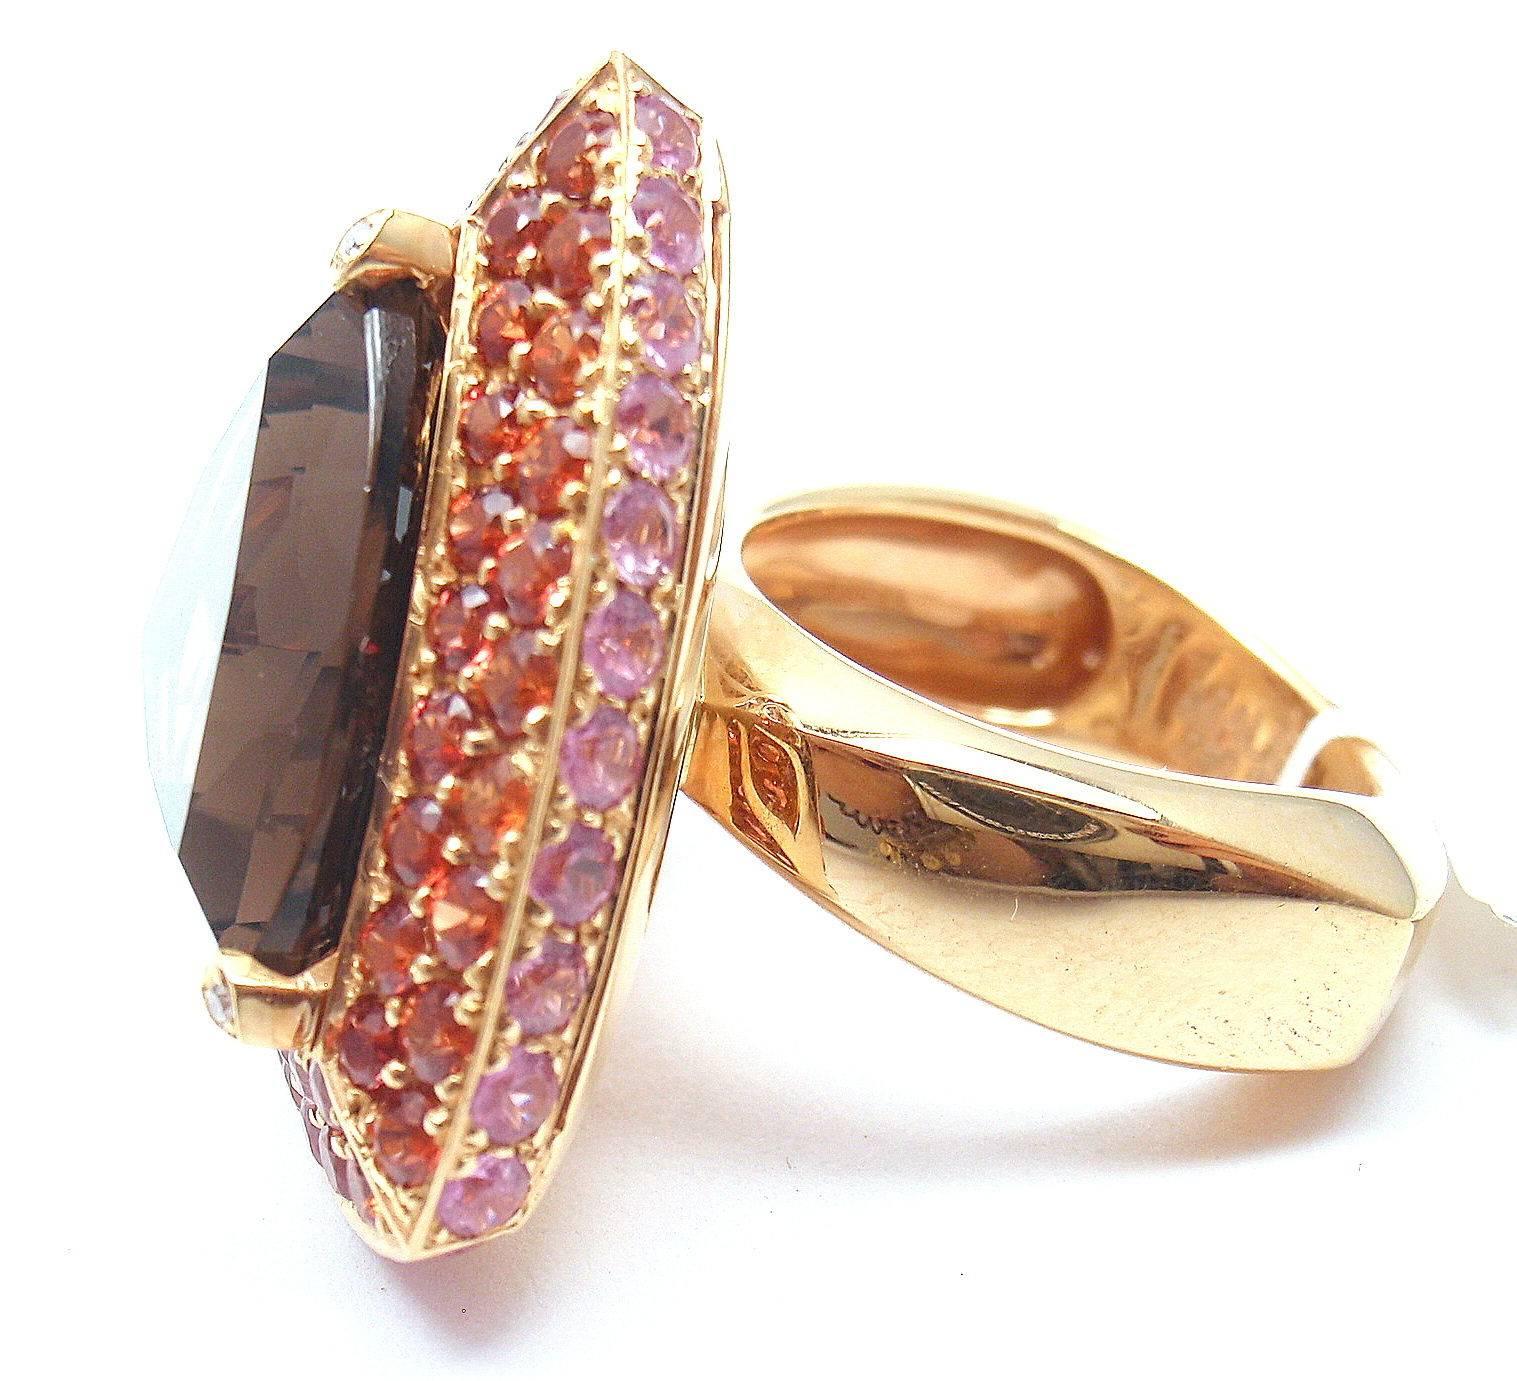 18k Yellow Gold Topaz Amethyst Citrine Large Triangle Ring by Mauboussin.  
With Large topaz (15 x 17mm) surrounded by citrines and amethysts, flanked by three small diamonds at tips
This ring comes with Mauboussin Box.

Details:  
Weight: 18.6